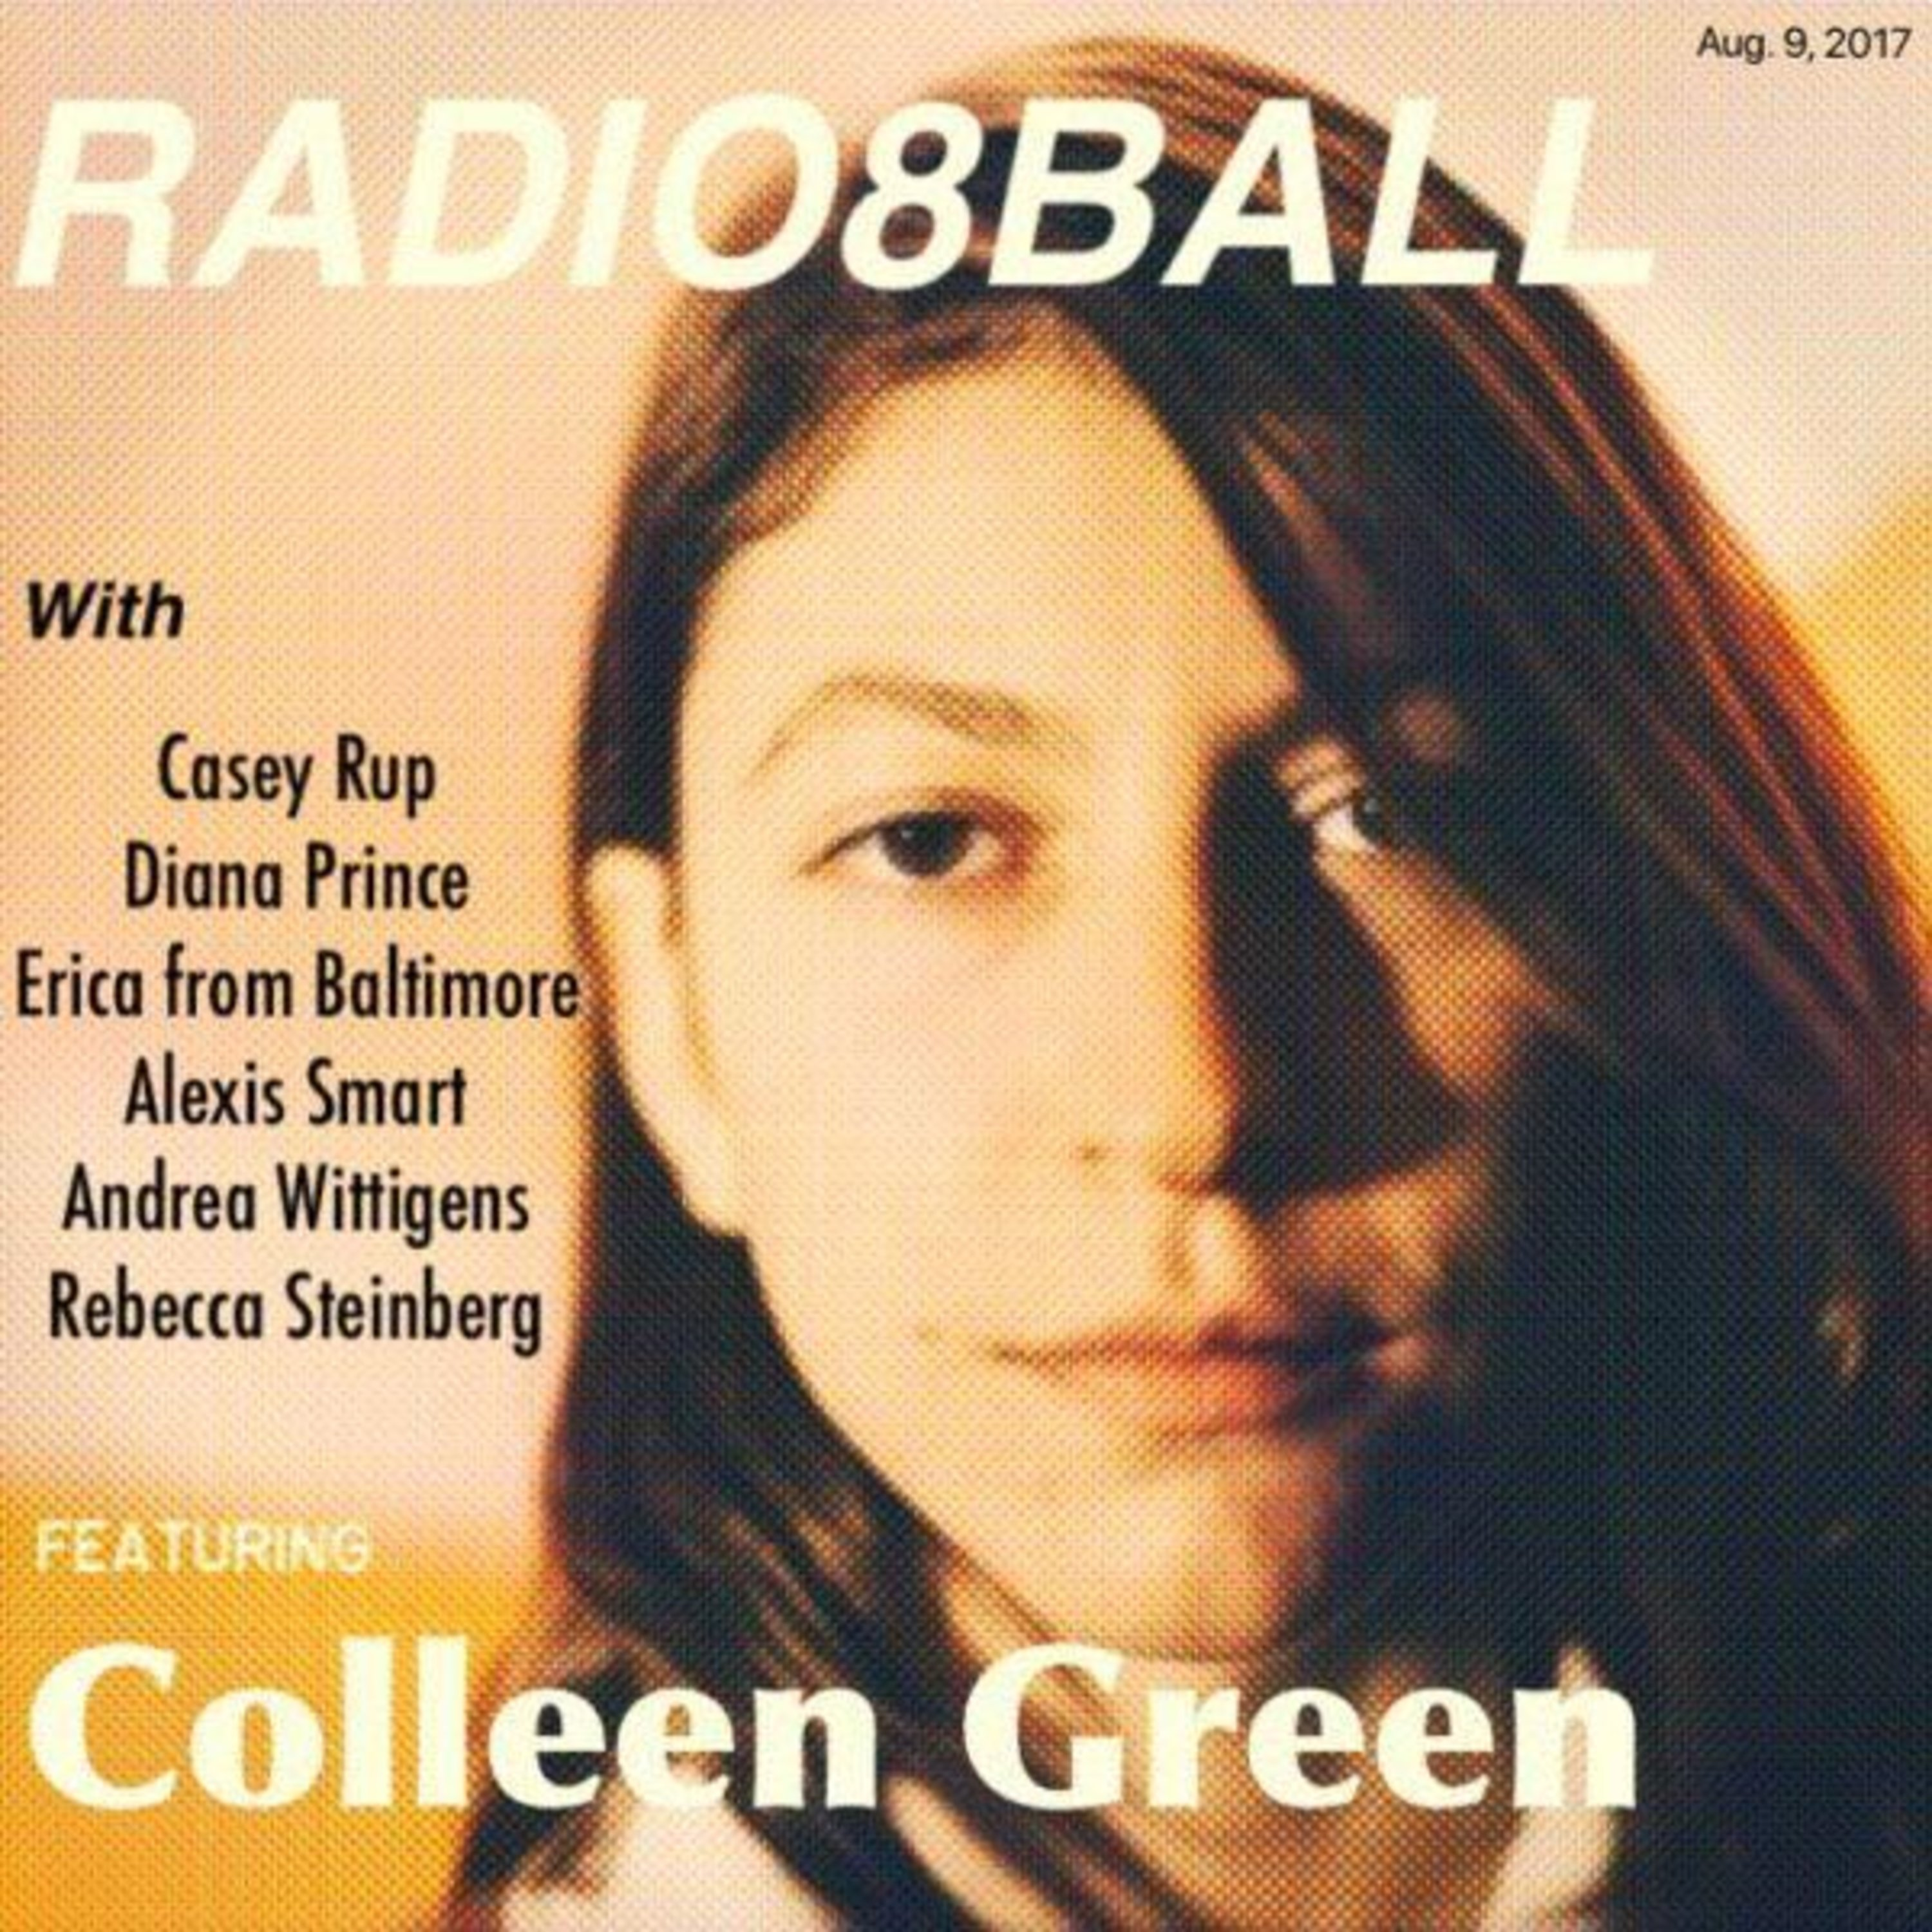 20: Erica from Baltimore & Colleen Green (August 9, 2017 - Pod 4)